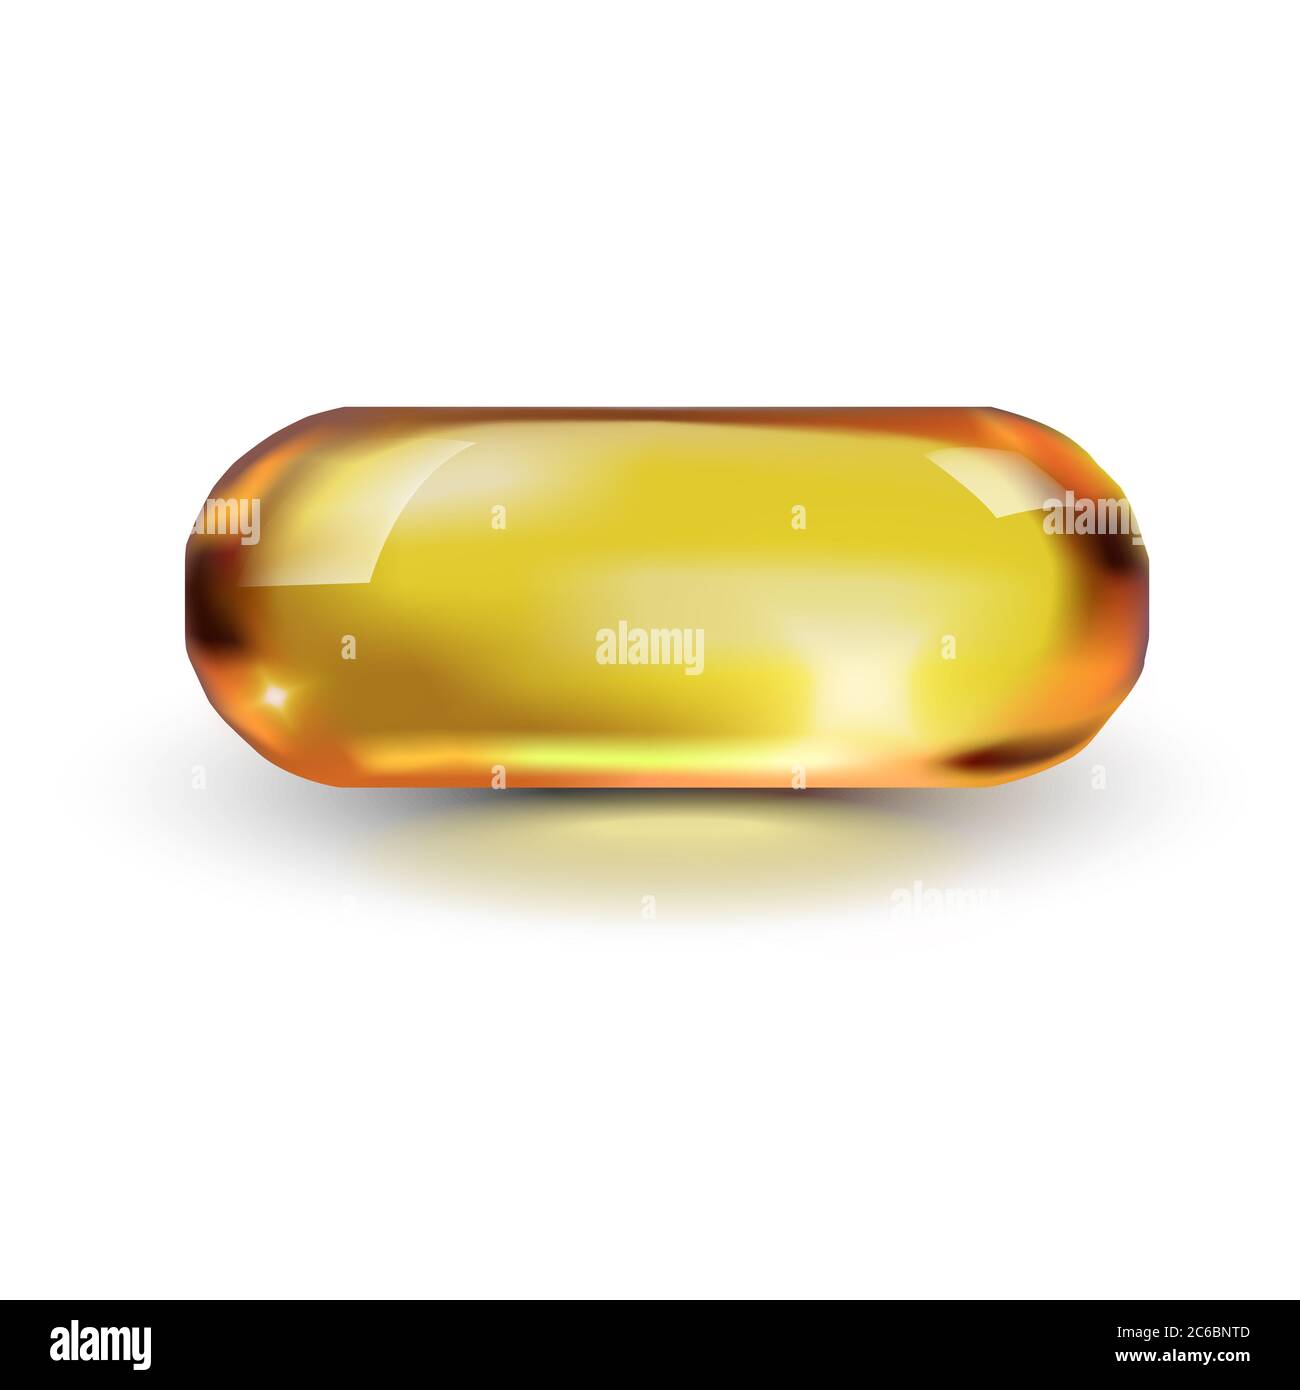 Oil golden capsule isolated on white background. Cosmetic pill capsule of vitamin E, A, Argan Almond oil, Omega 3, fish. Gold glass ball template. Stock Photo